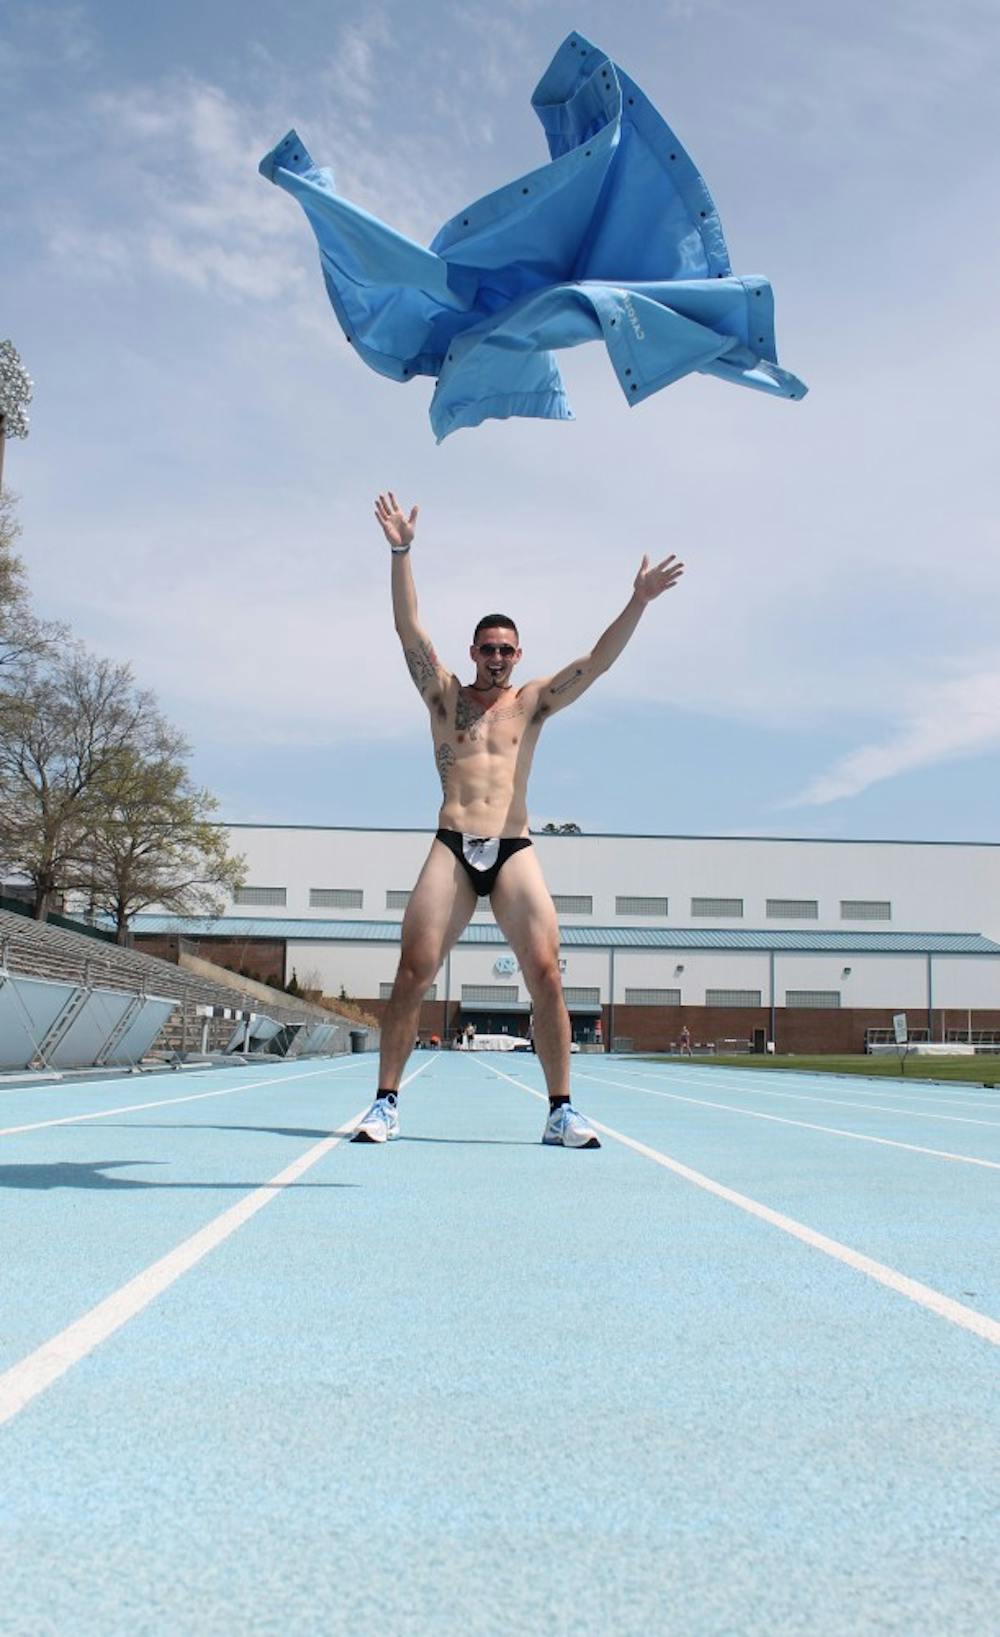 Dylan Moore stripped in a Biology 101 in a video that went viral. A former track athlete, he was asked to leave the team and faces Honor Court charges for the stunt.